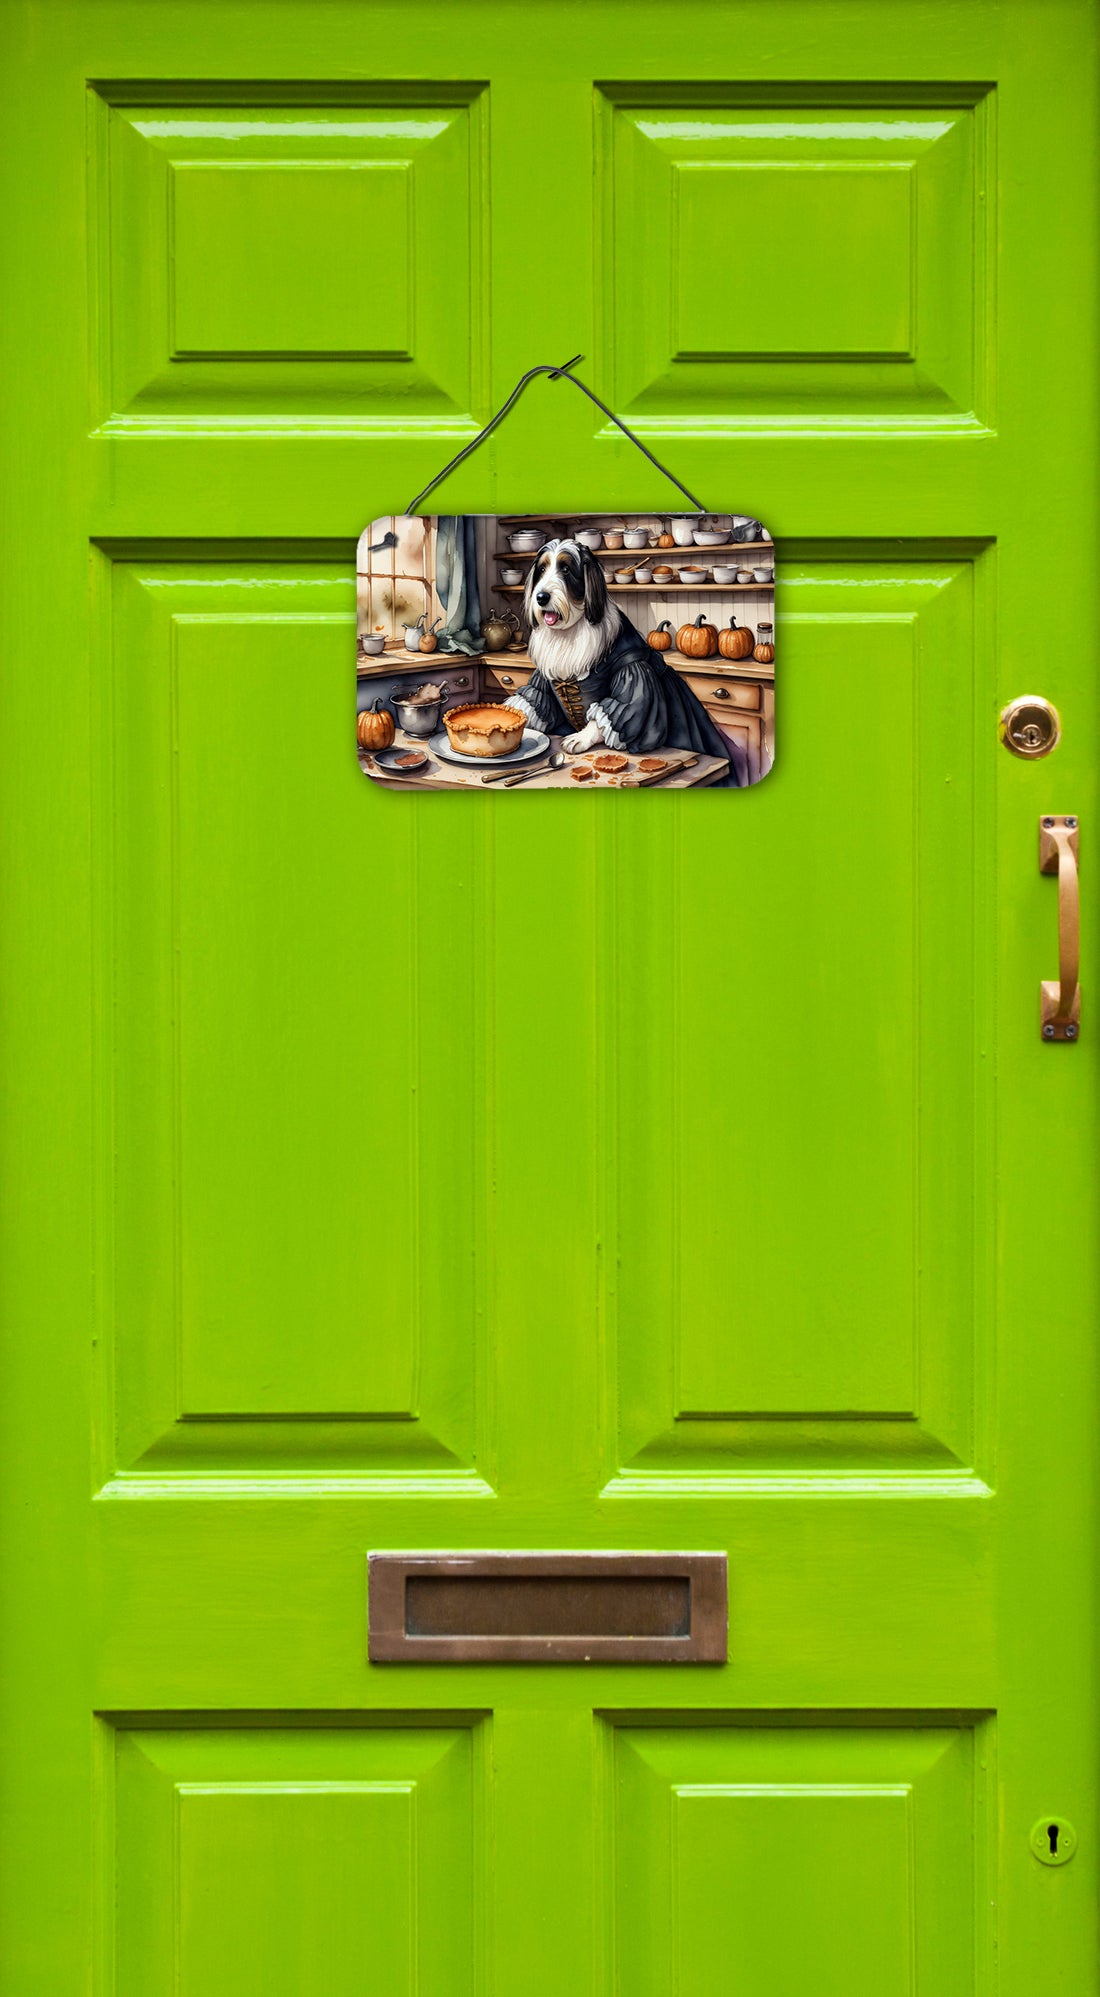 Buy this Bearded Collie Fall Kitchen Pumpkins Wall or Door Hanging Prints